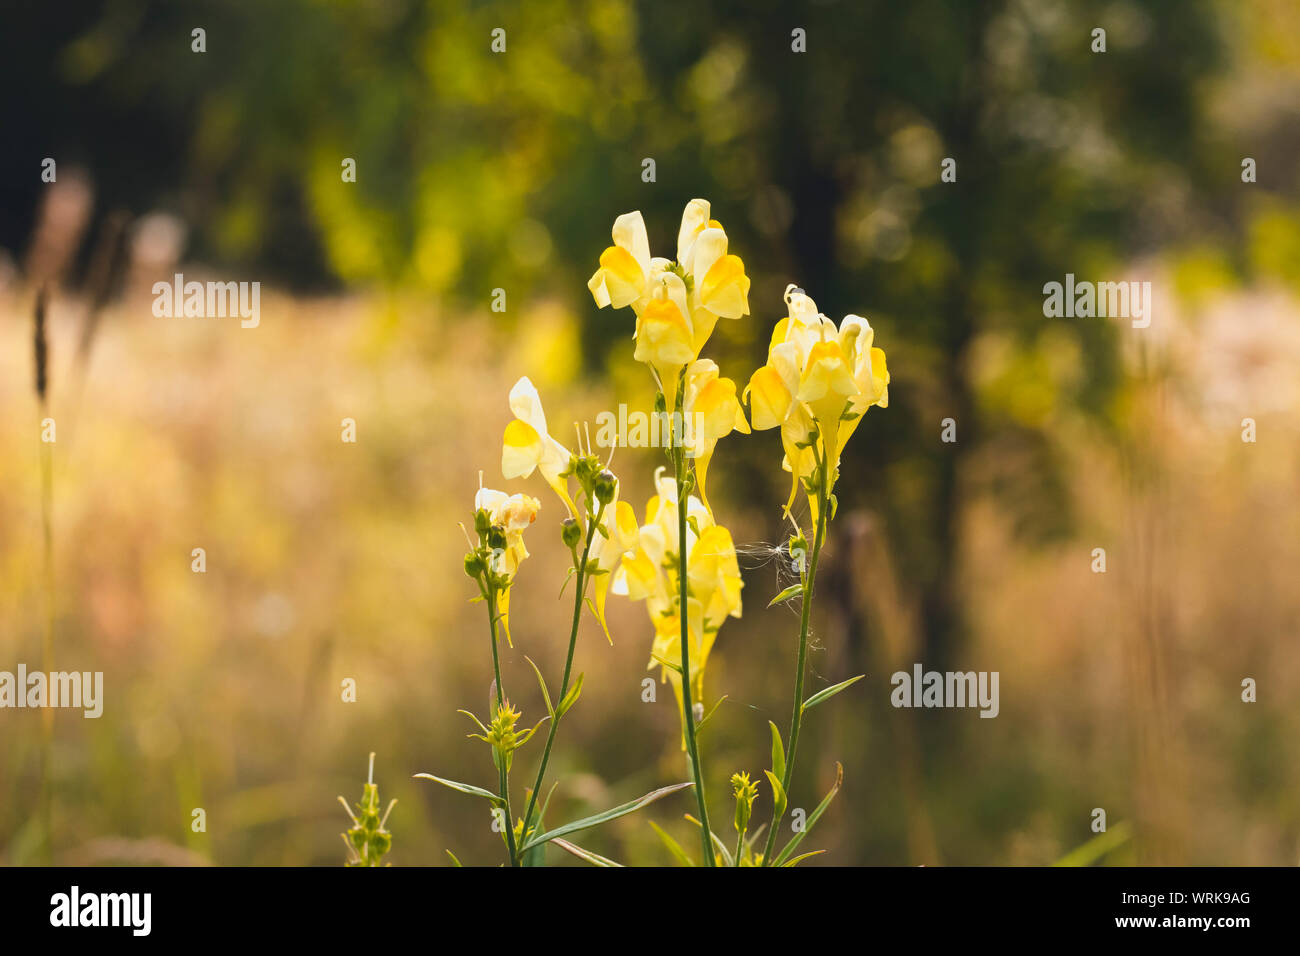 Several yellow flowers in a forest glade. Flowers grow on the edge of the forest in the sunniest place. Stock Photo